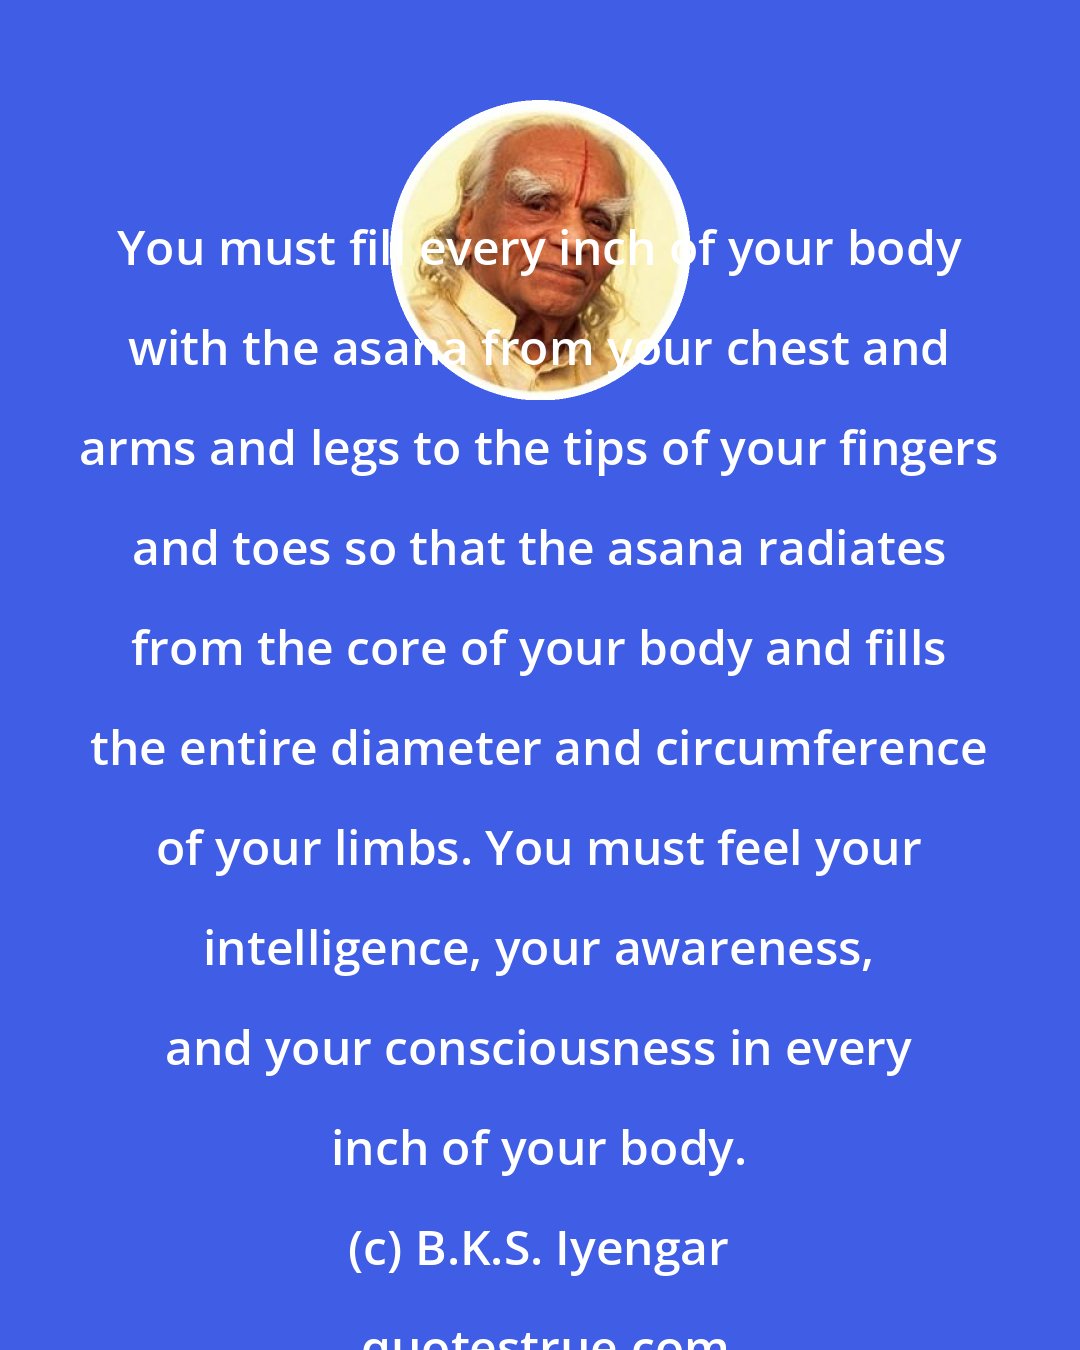 B.K.S. Iyengar: You must fill every inch of your body with the asana from your chest and arms and legs to the tips of your fingers and toes so that the asana radiates from the core of your body and fills the entire diameter and circumference of your limbs. You must feel your intelligence, your awareness, and your consciousness in every inch of your body.